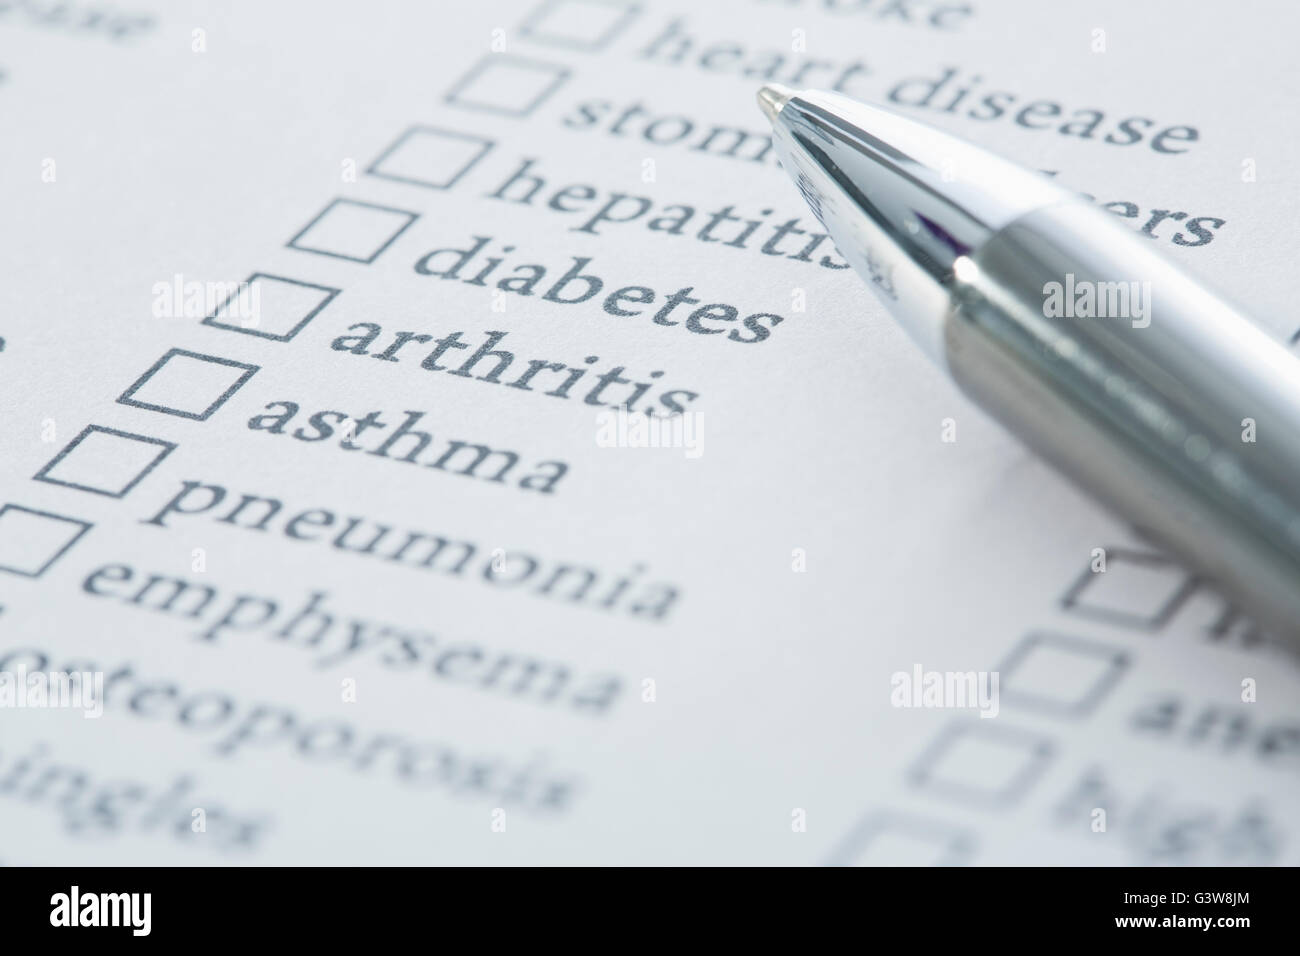 Pen on checklist with diseases Stock Photo